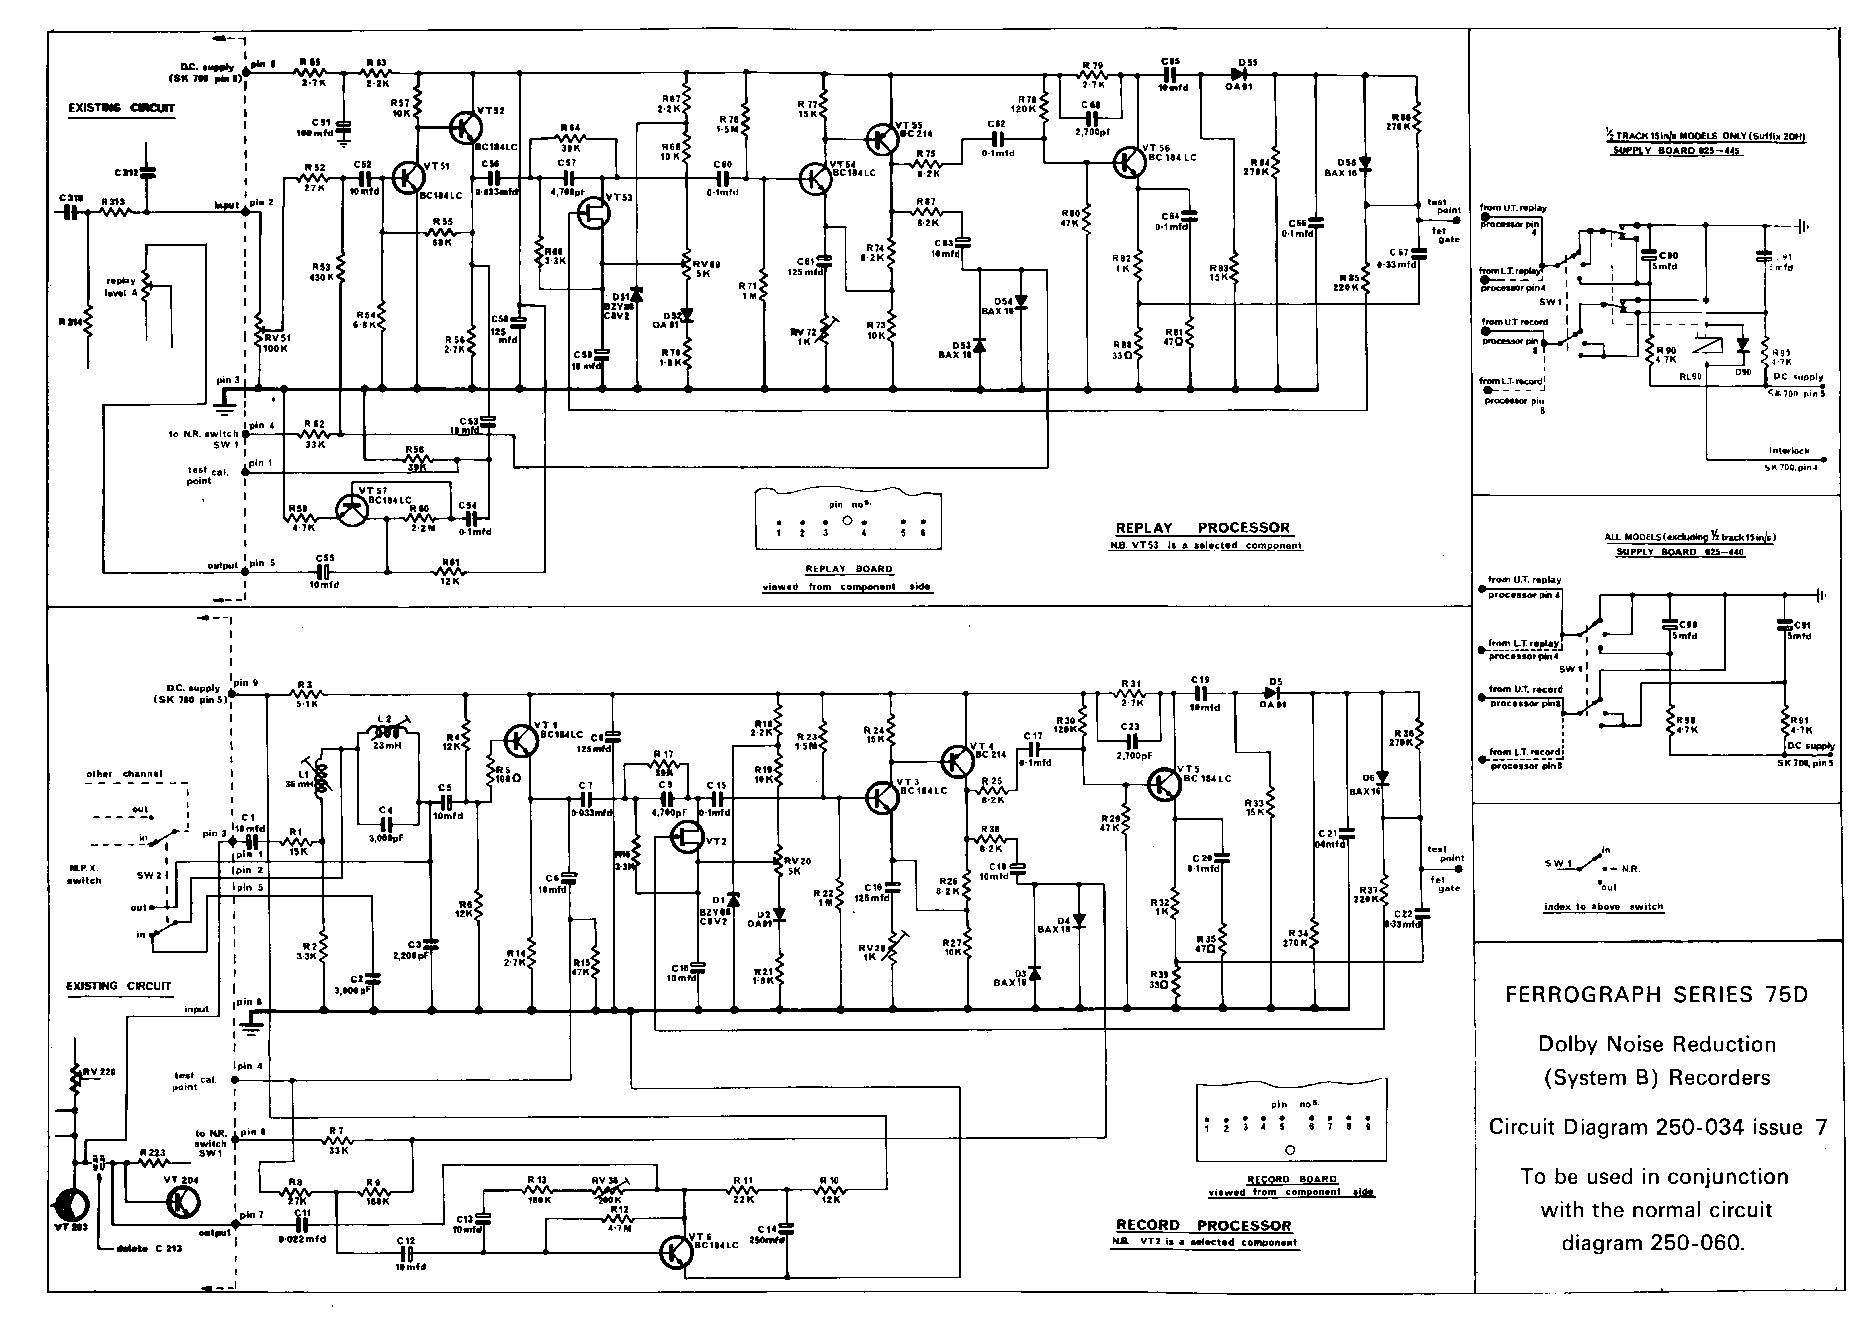 Dolby Circuit Diagram - Record - Dolby Circuit Diagram